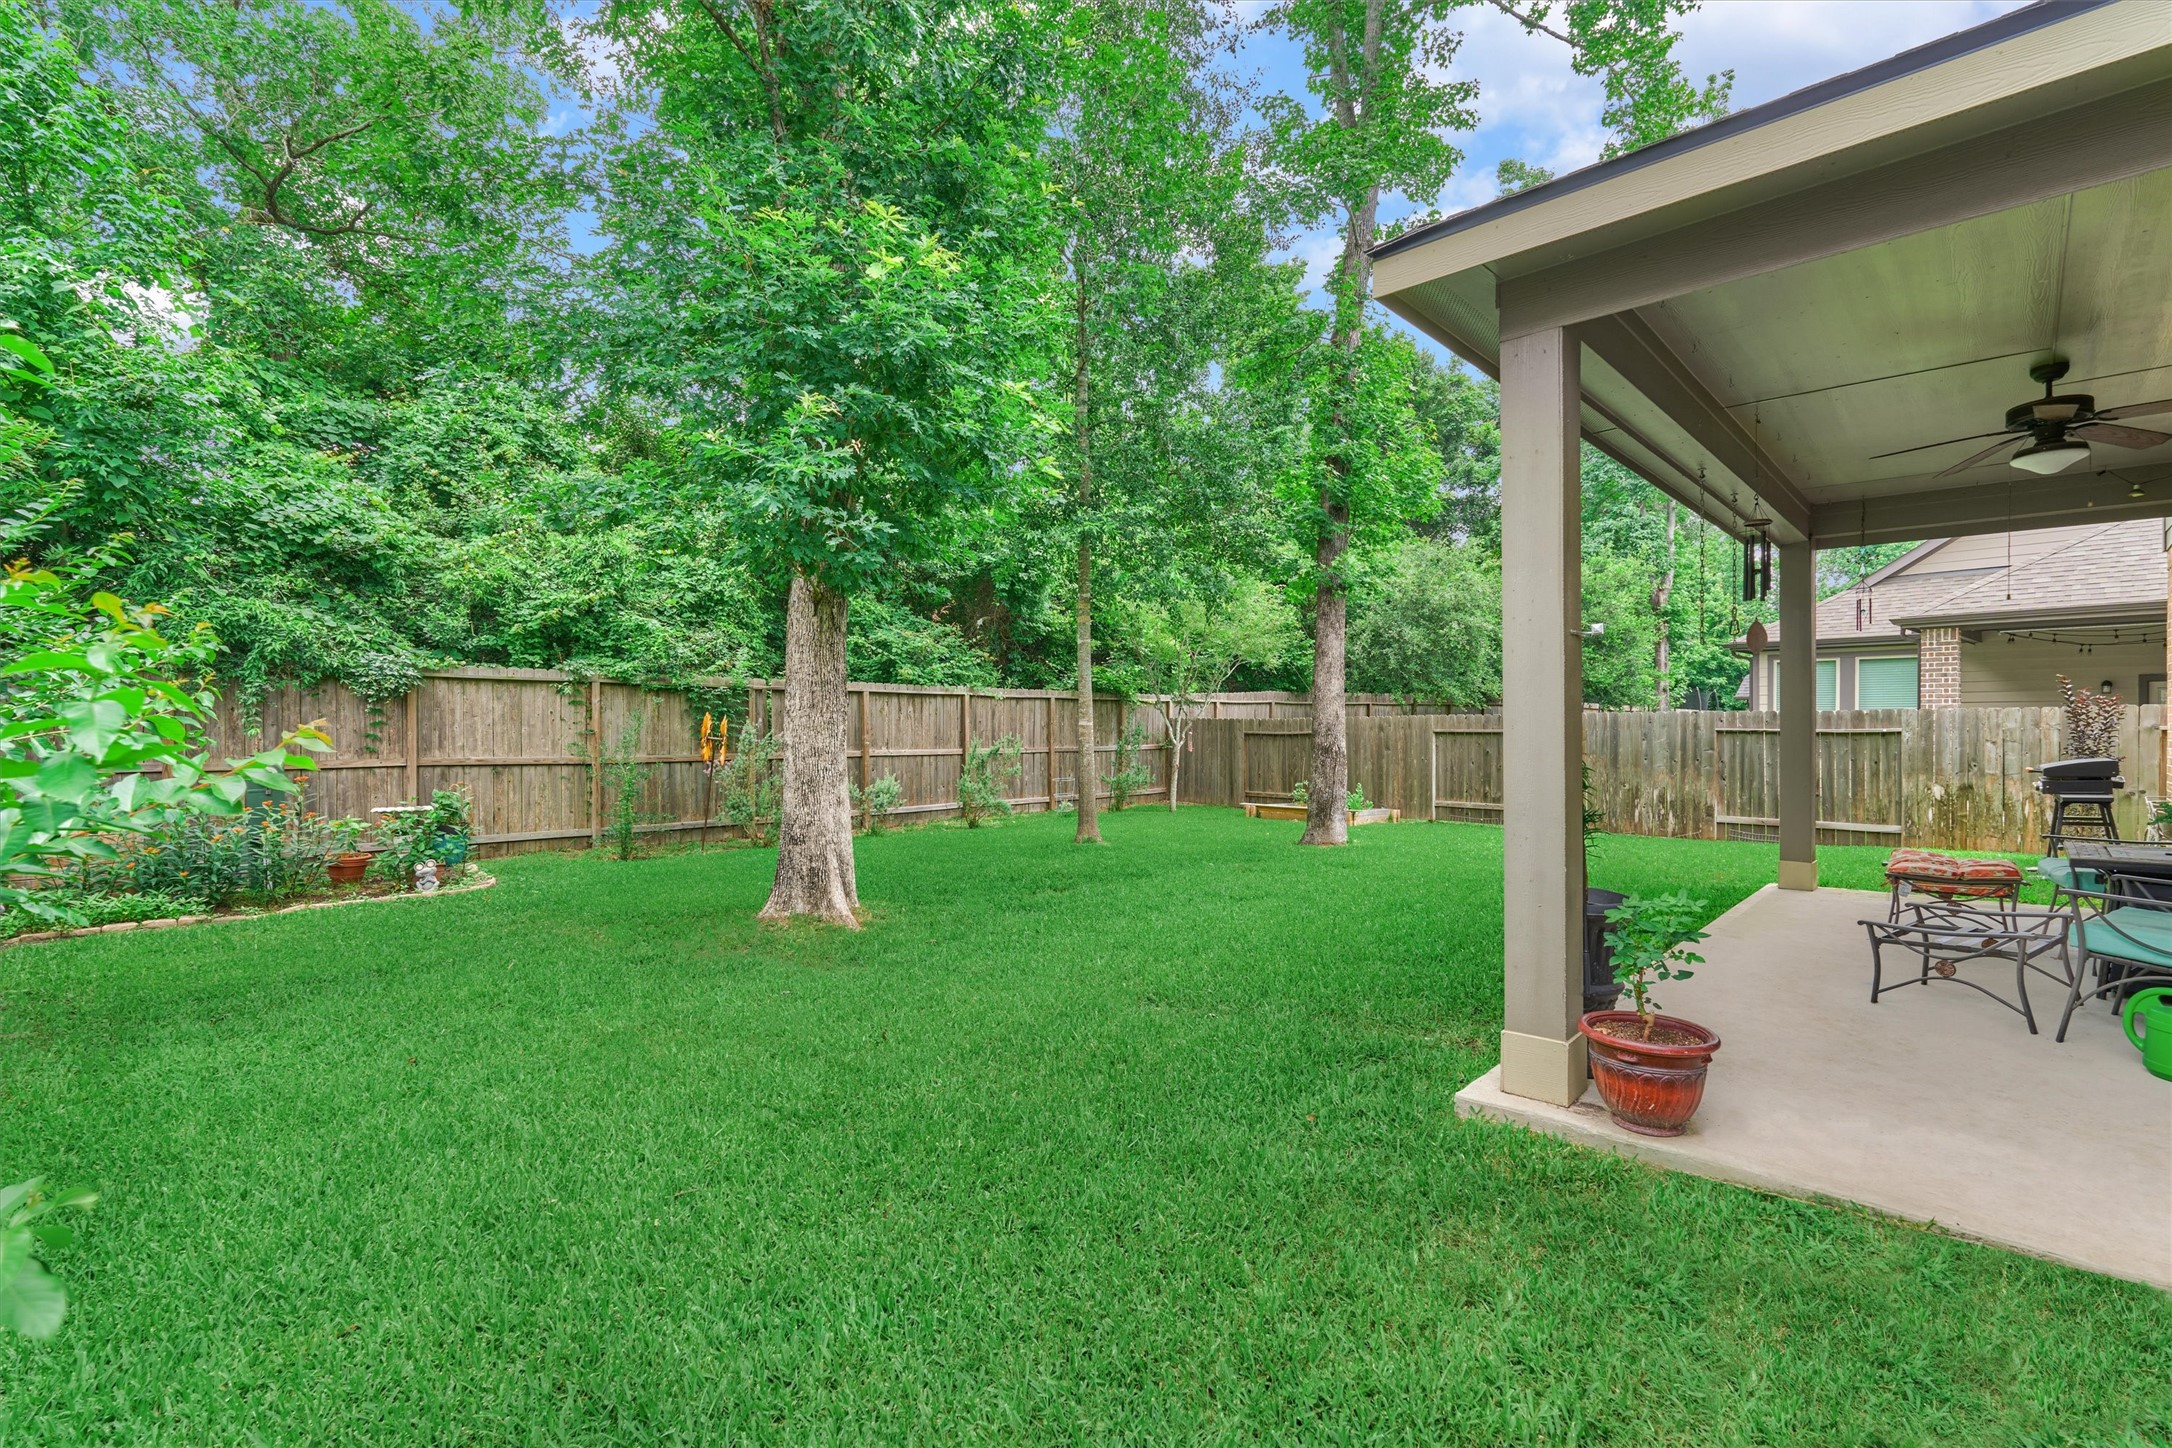 The backyard enjoys a wonderful use of space and is great for entertaining!